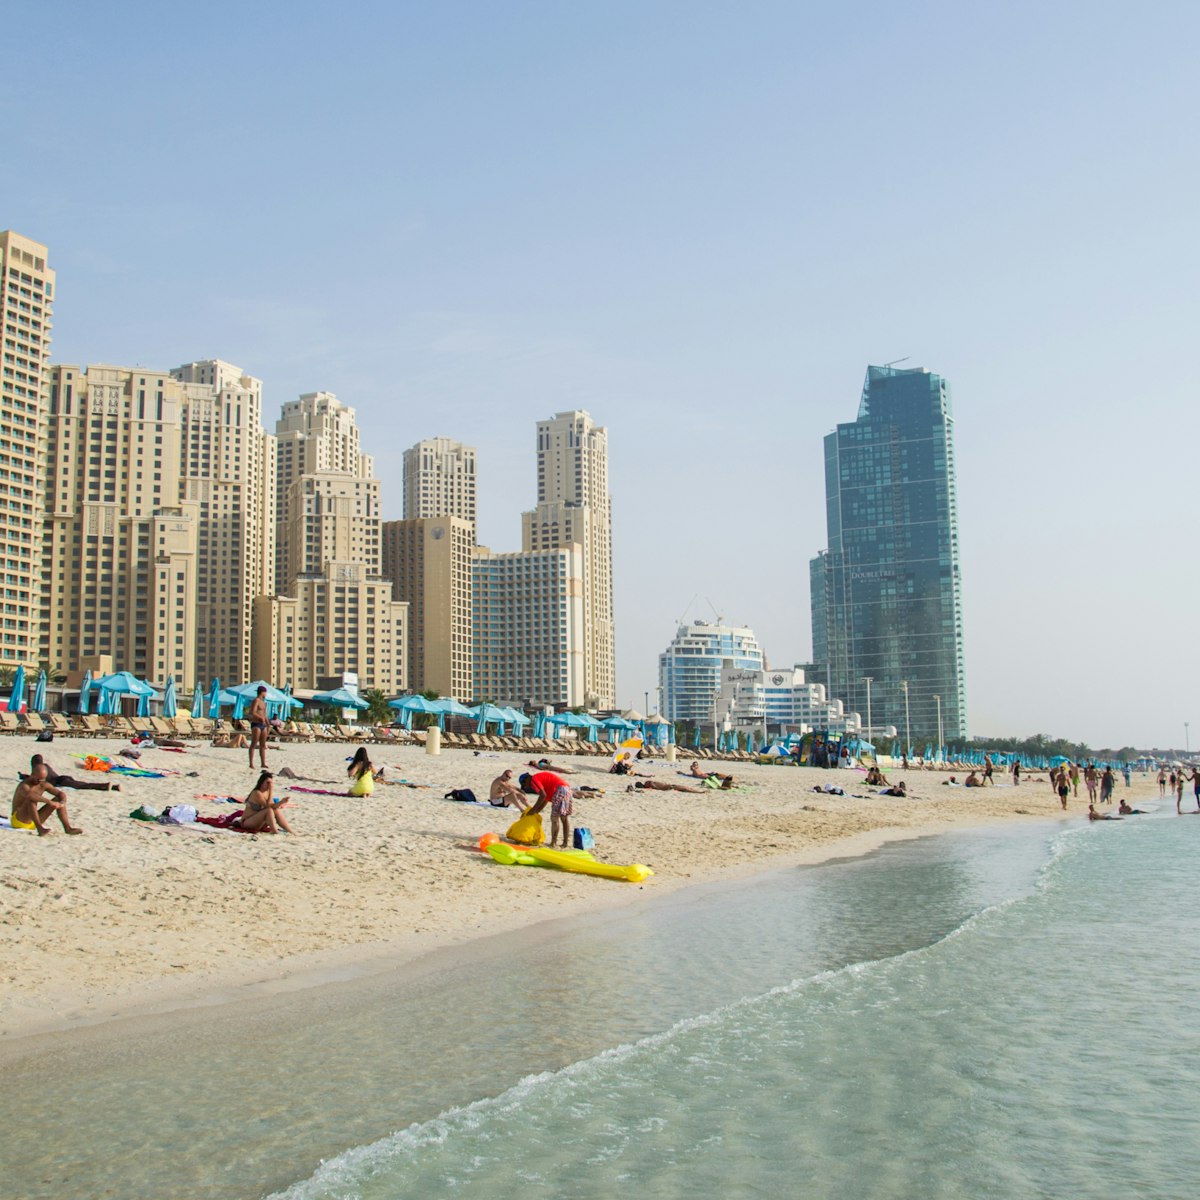 Dubai, UAE - 18 Juny 2016: Dubai Marina JBR beach; Shutterstock ID 561378172; Your name (First / Last): Lauren Keith; GL account no.: 65050; Netsuite department name: Online Editorial; Full Product or Project name including edition: Authentic Dubai Article